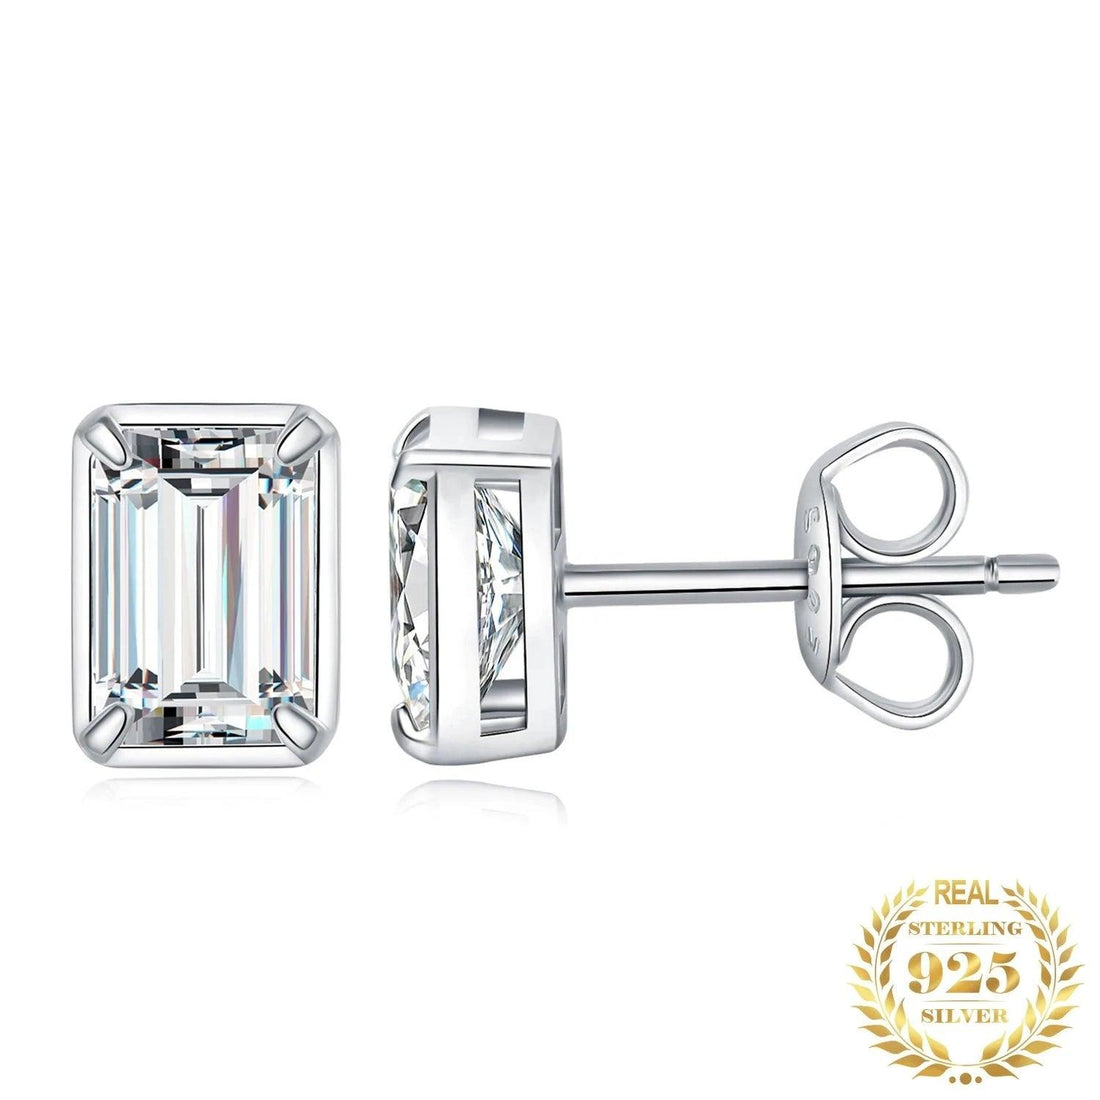 JPCJ233 Stud Earrings Charm Jewelry - 925 Sterling Silver Moissanite D Color - Touchy Style